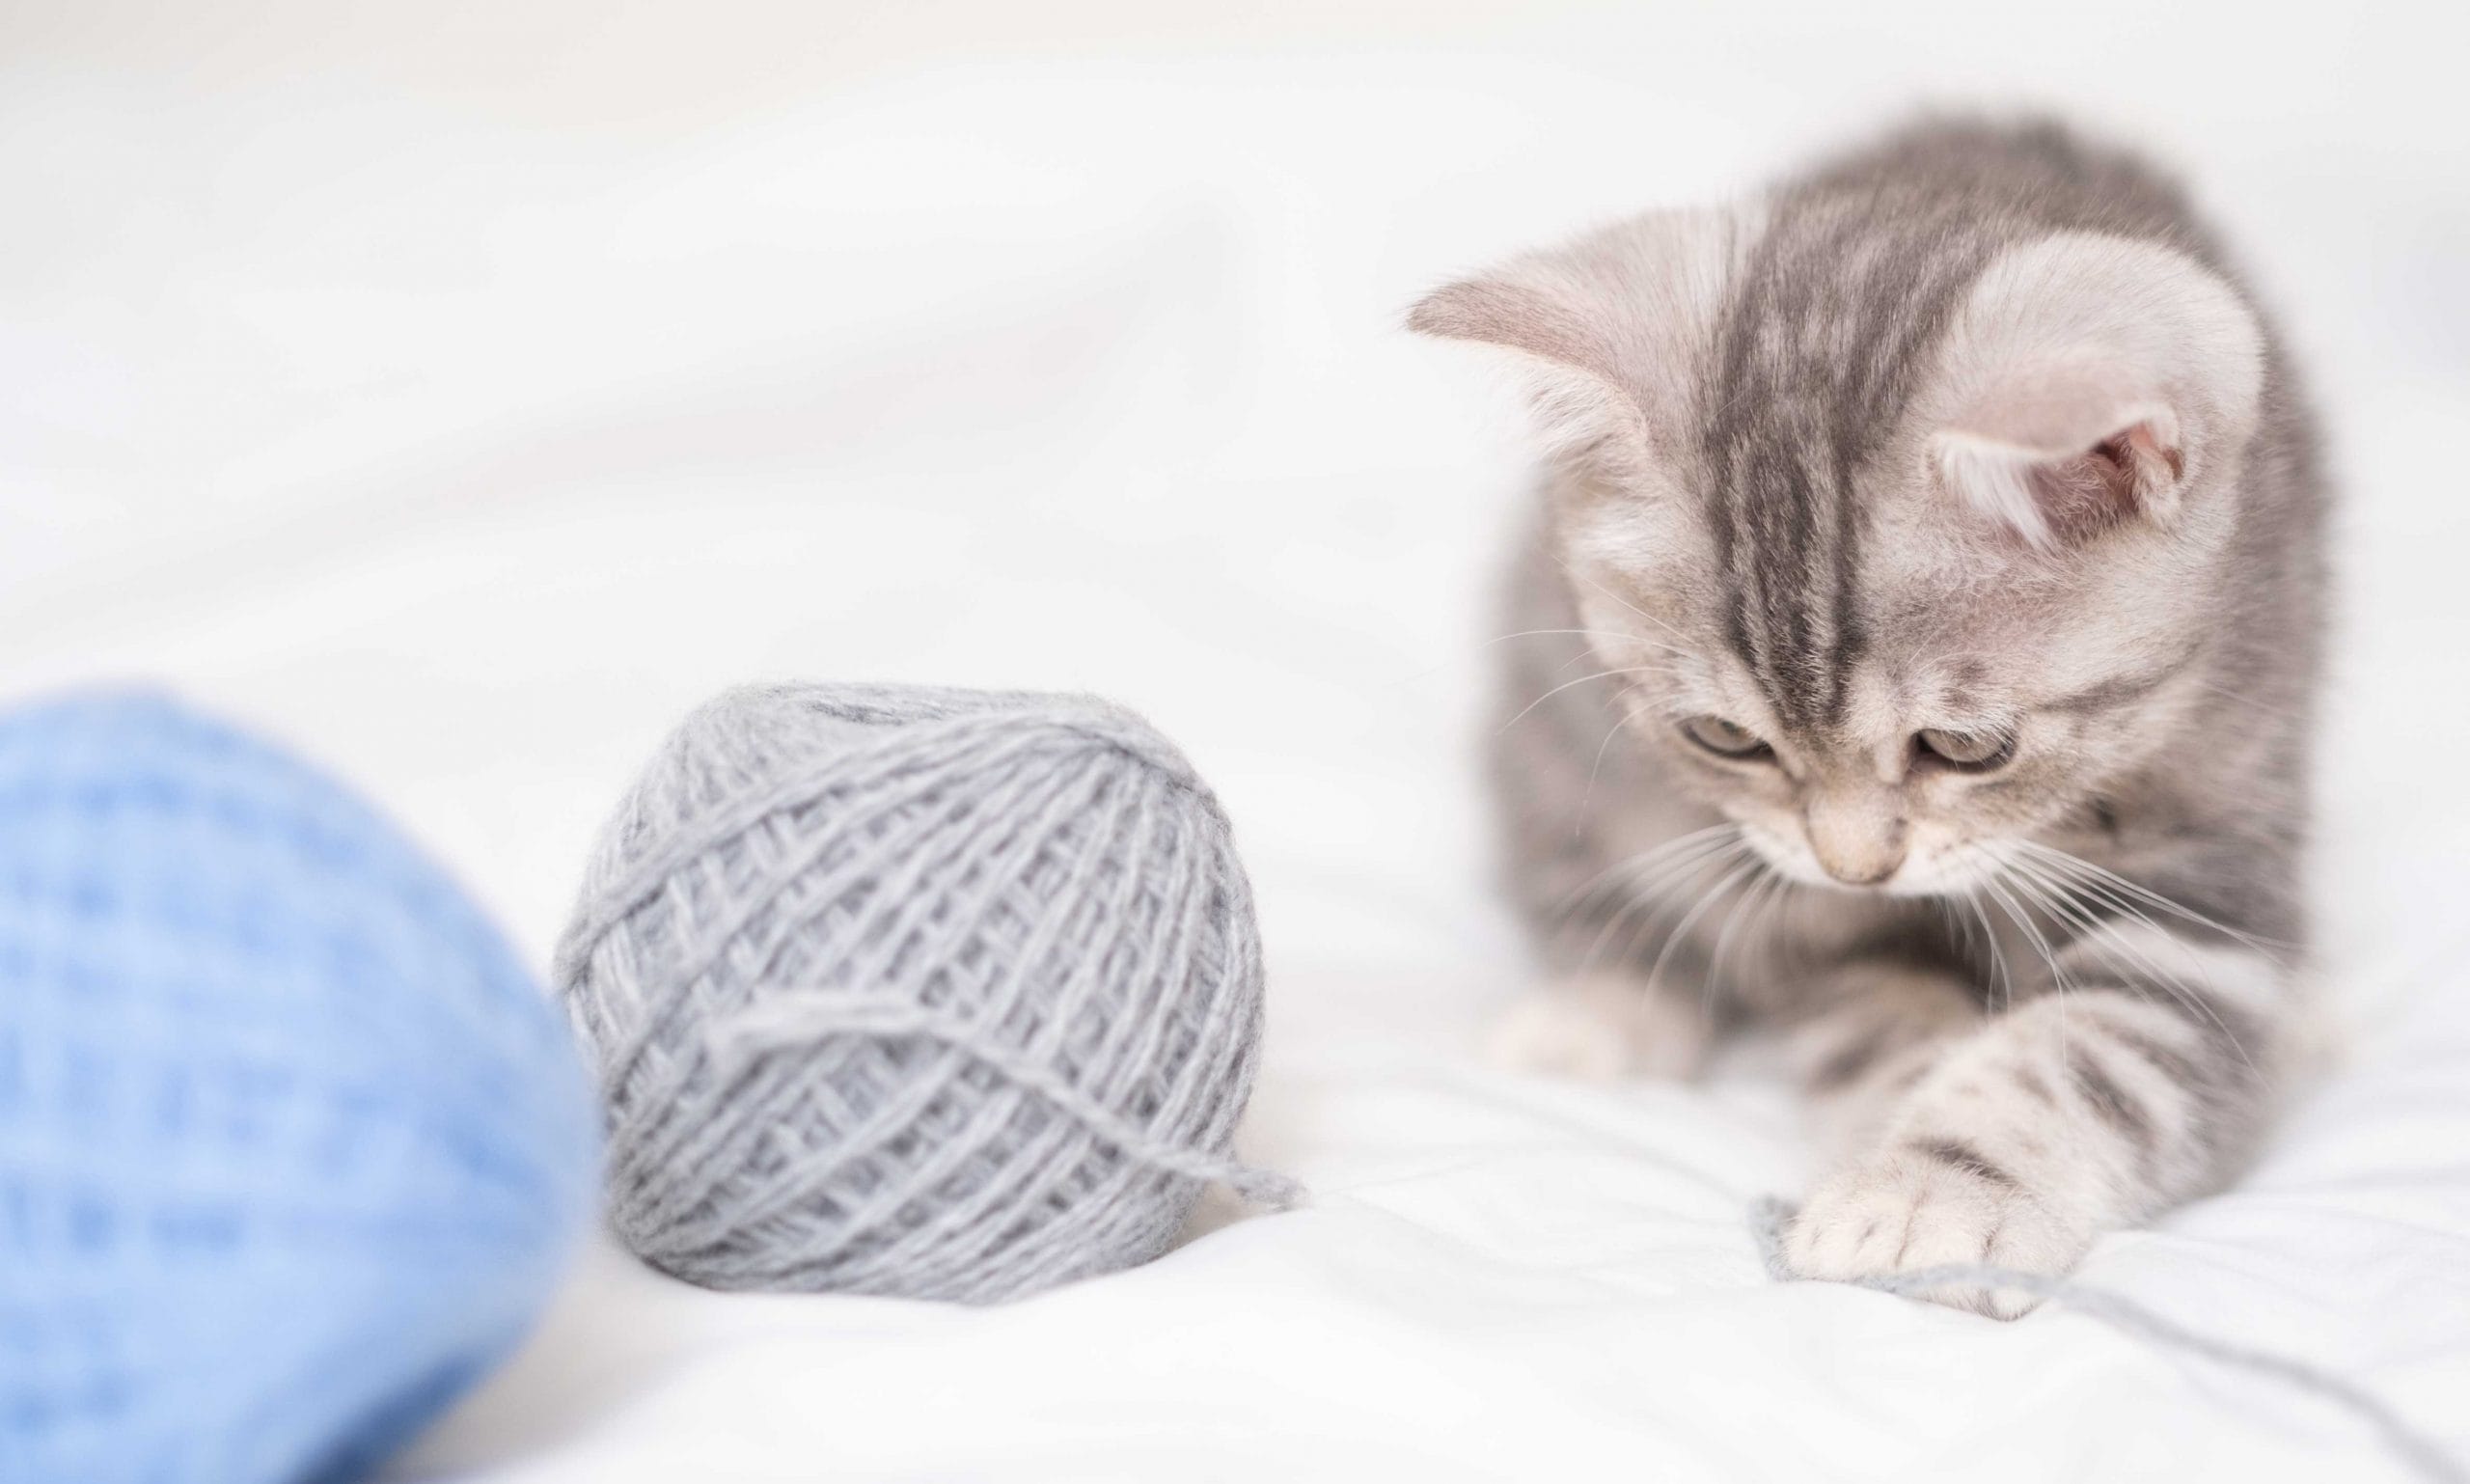 kitten constipation: kitten playing on bed with yarn